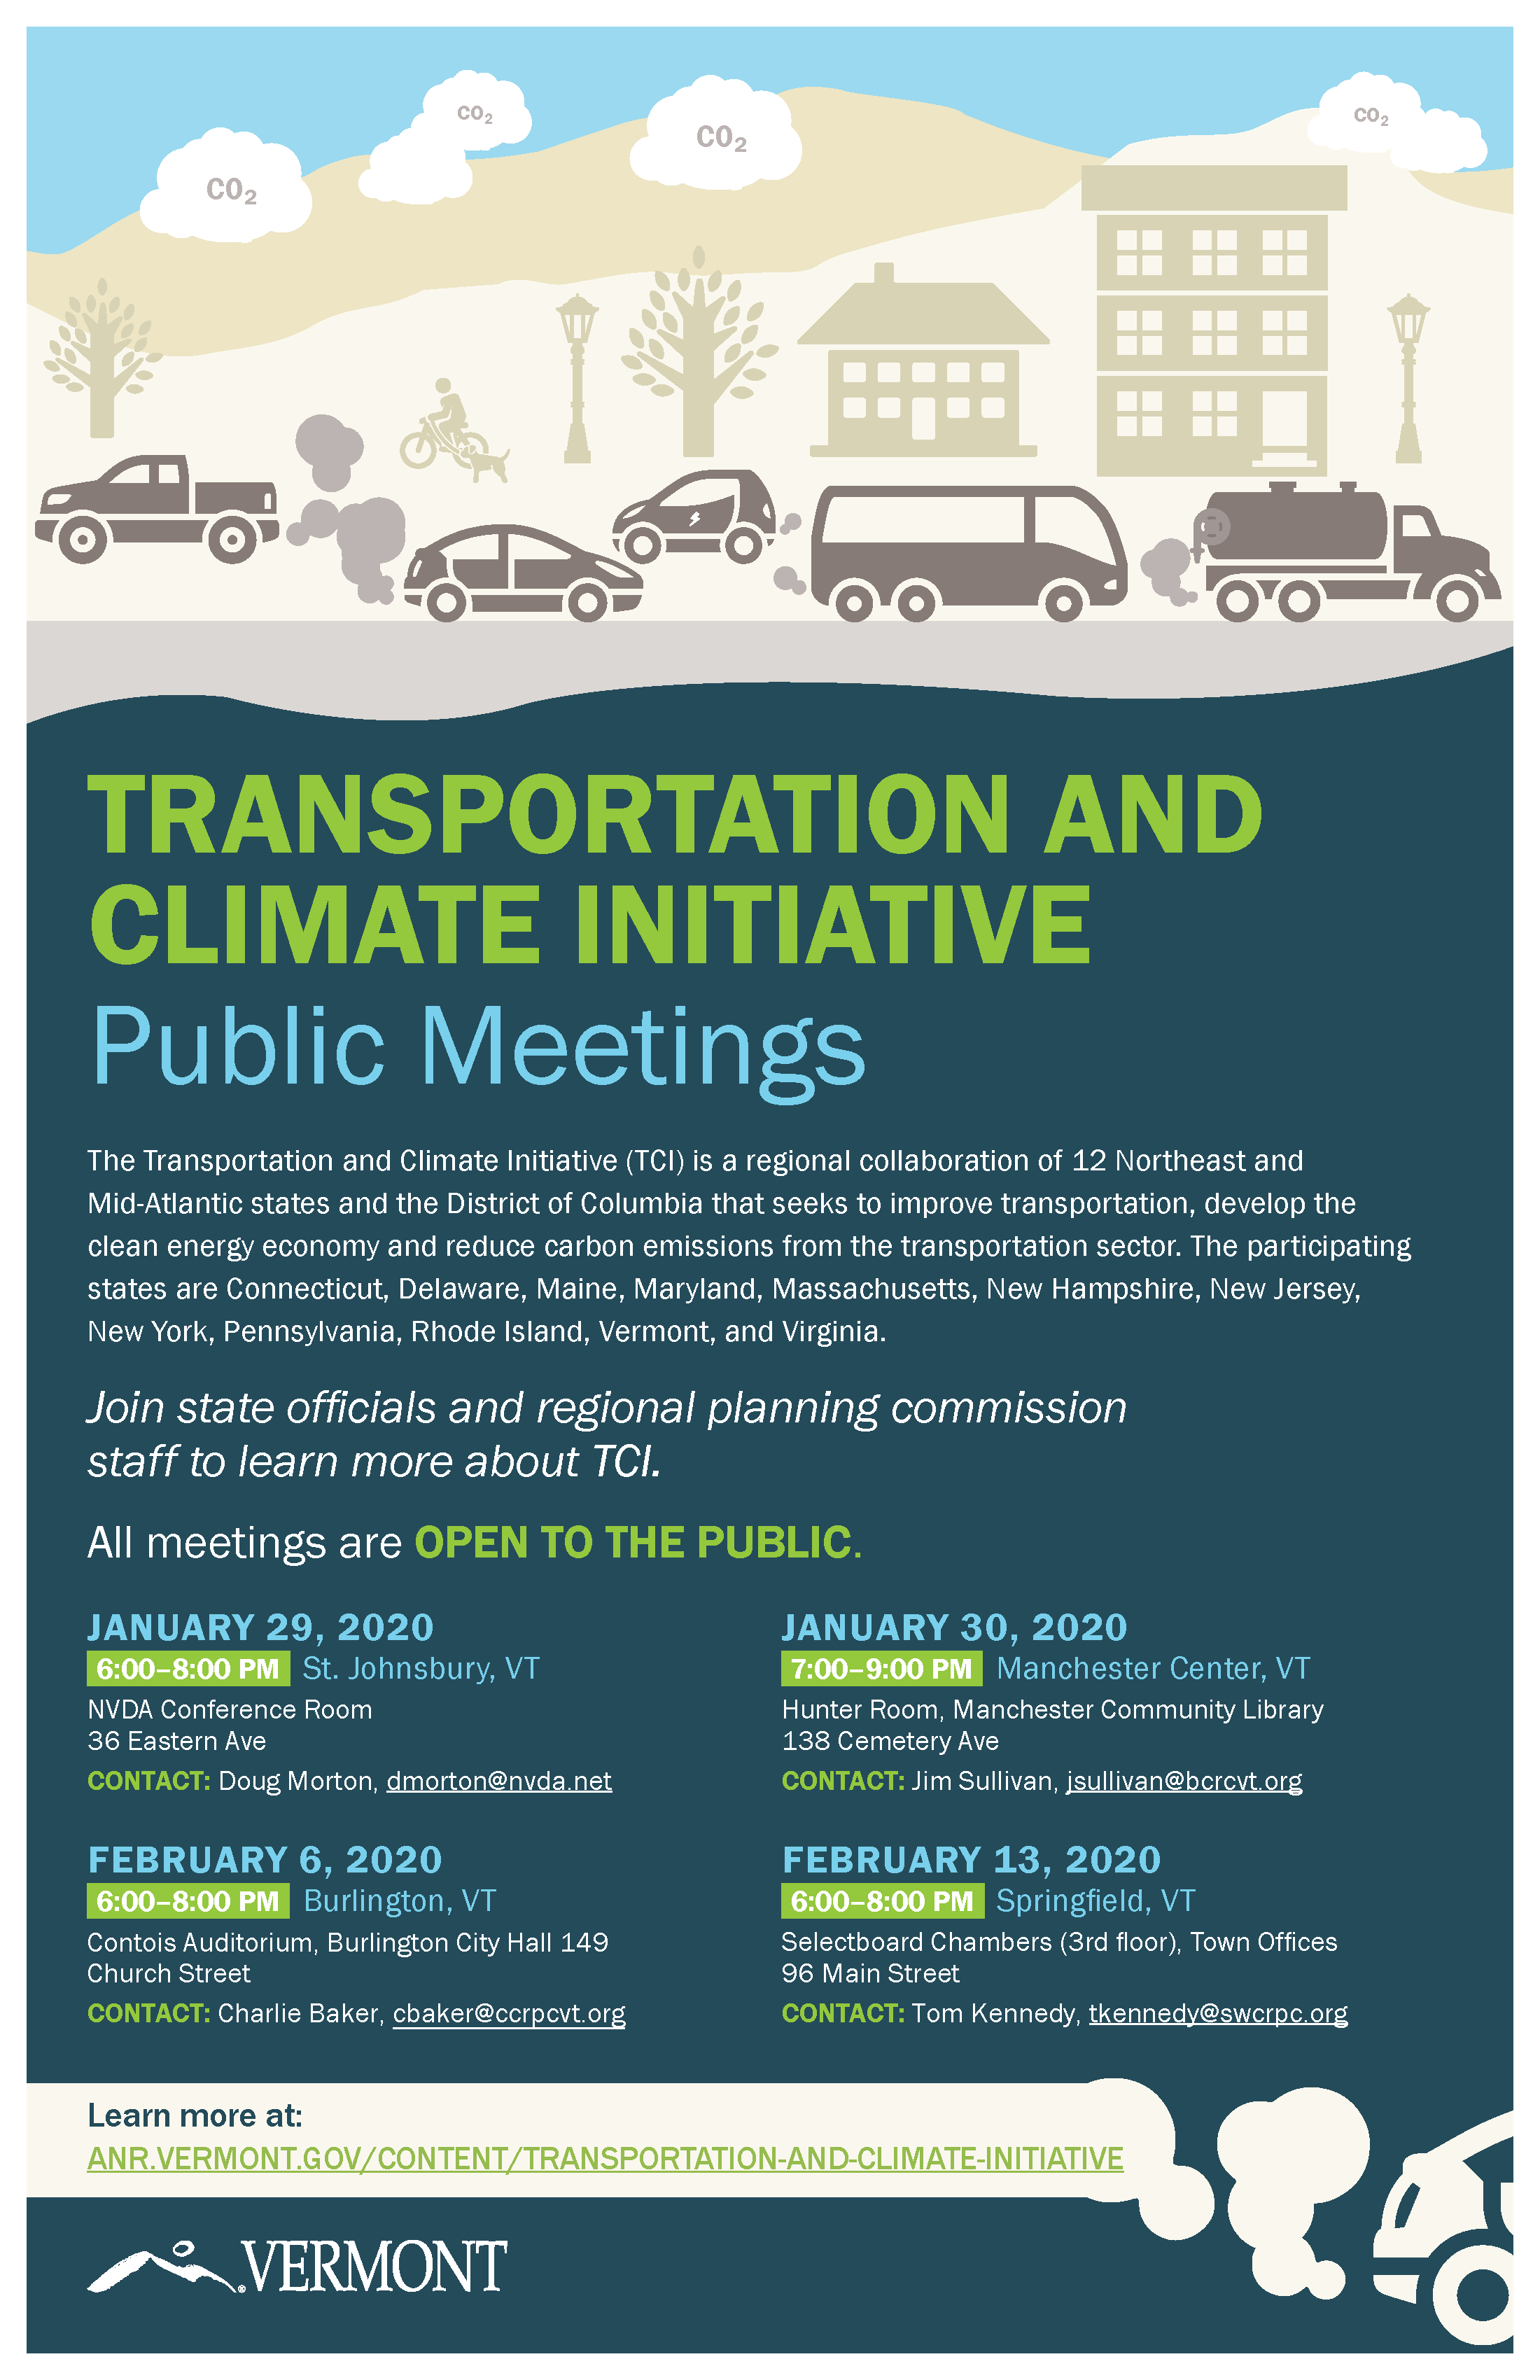 Transportation and Climate Initiative Public Meeting @ Springfield Selectboard Chambers | Springfield | Vermont | United States